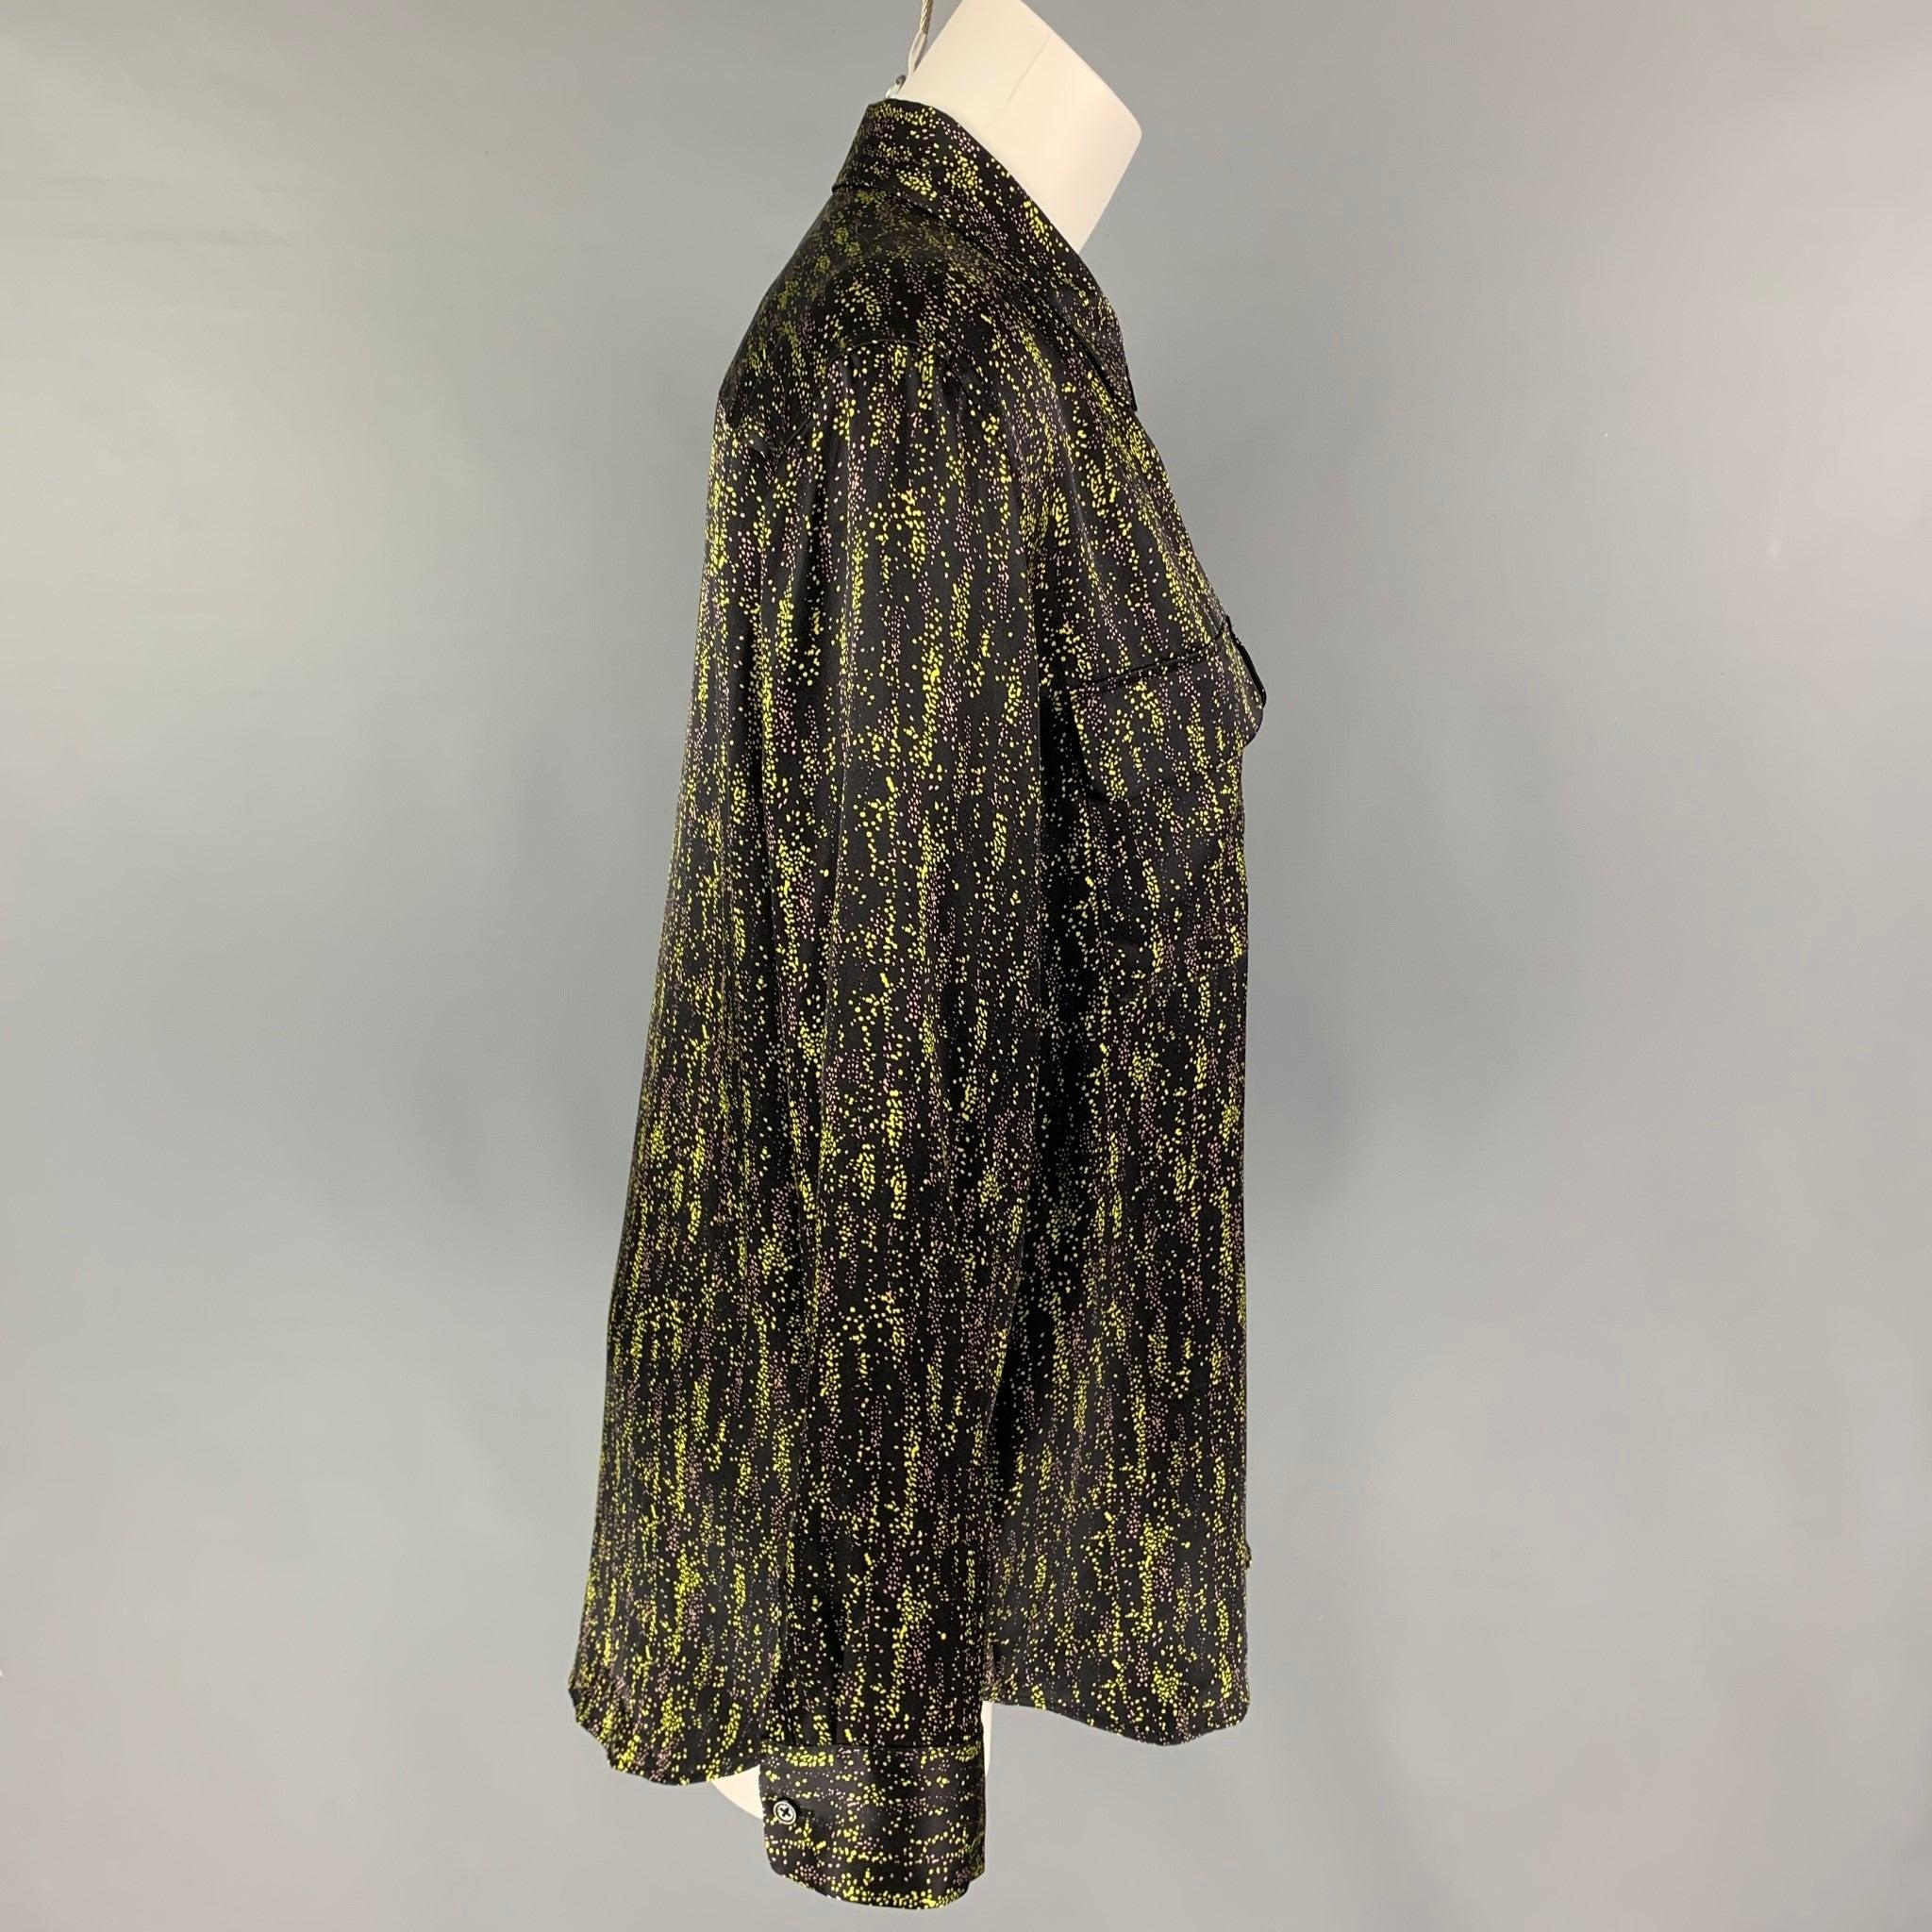 EQUIPMENT FEMME shirt comes in a black & green print silk featuring a spread collar, front flap pockets, and a button up closure.
Very Good
Pre-Owned Condition. 

Marked:   L  

Measurements: 
 
Shoulder: 18 inches  Bust: 44 inches  Sleeve: 25